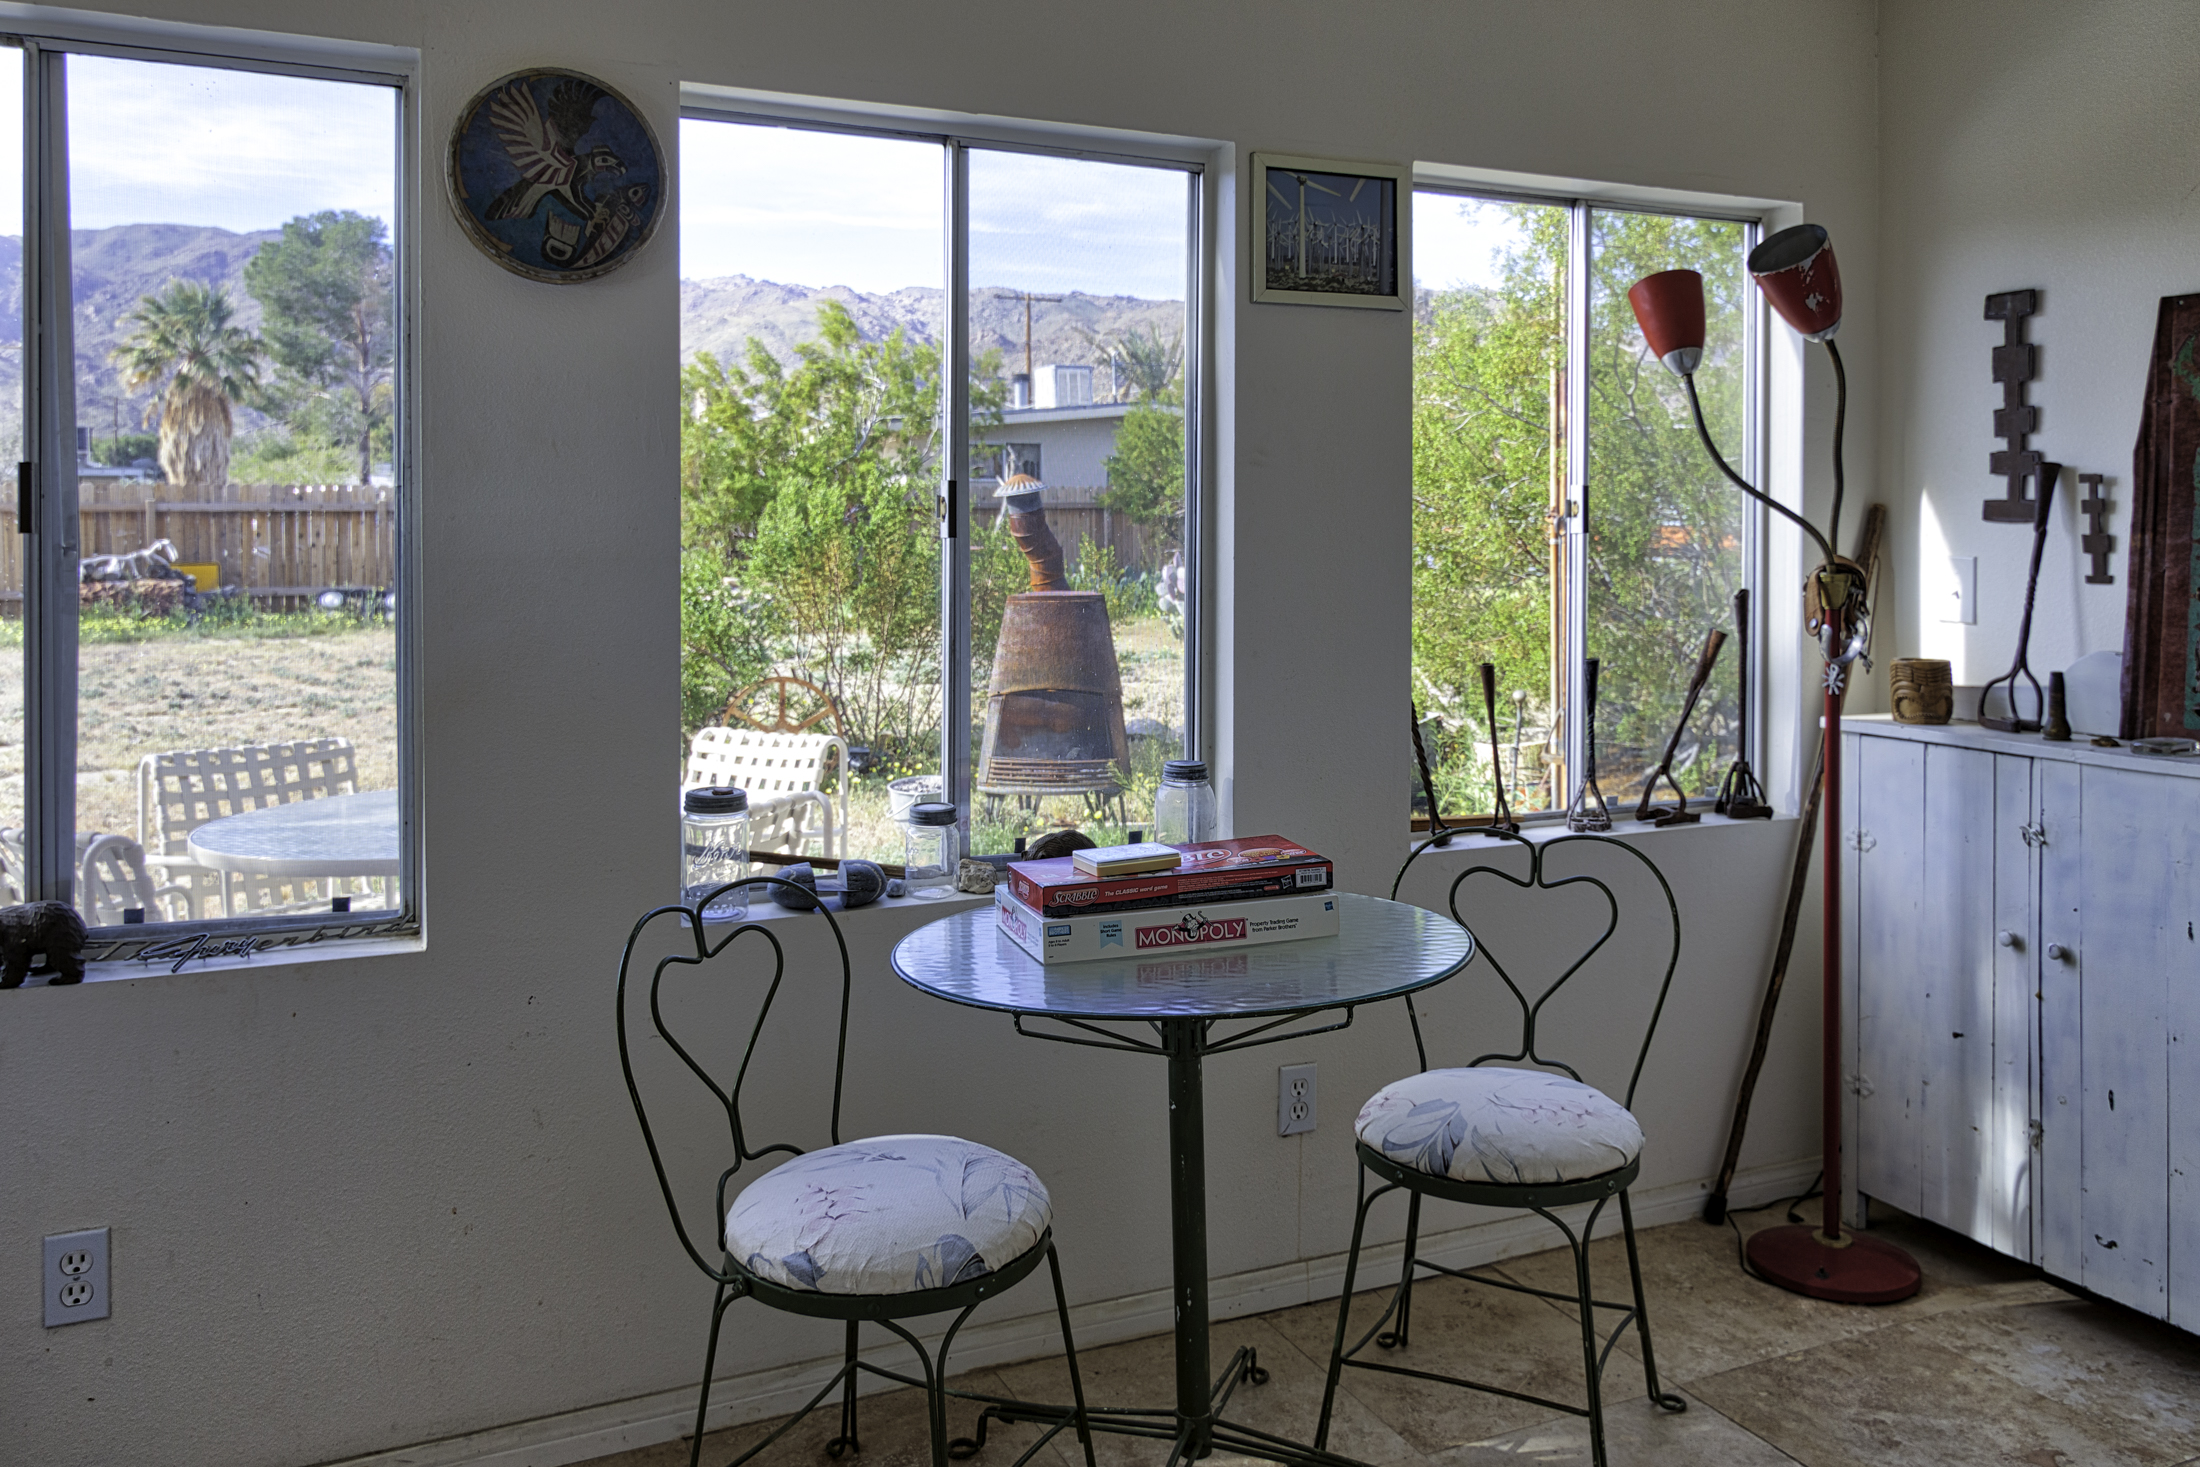 A sun room with view of small round glass table and windows viewing into the yard of the vacation rental and various rustic items on the window sills.